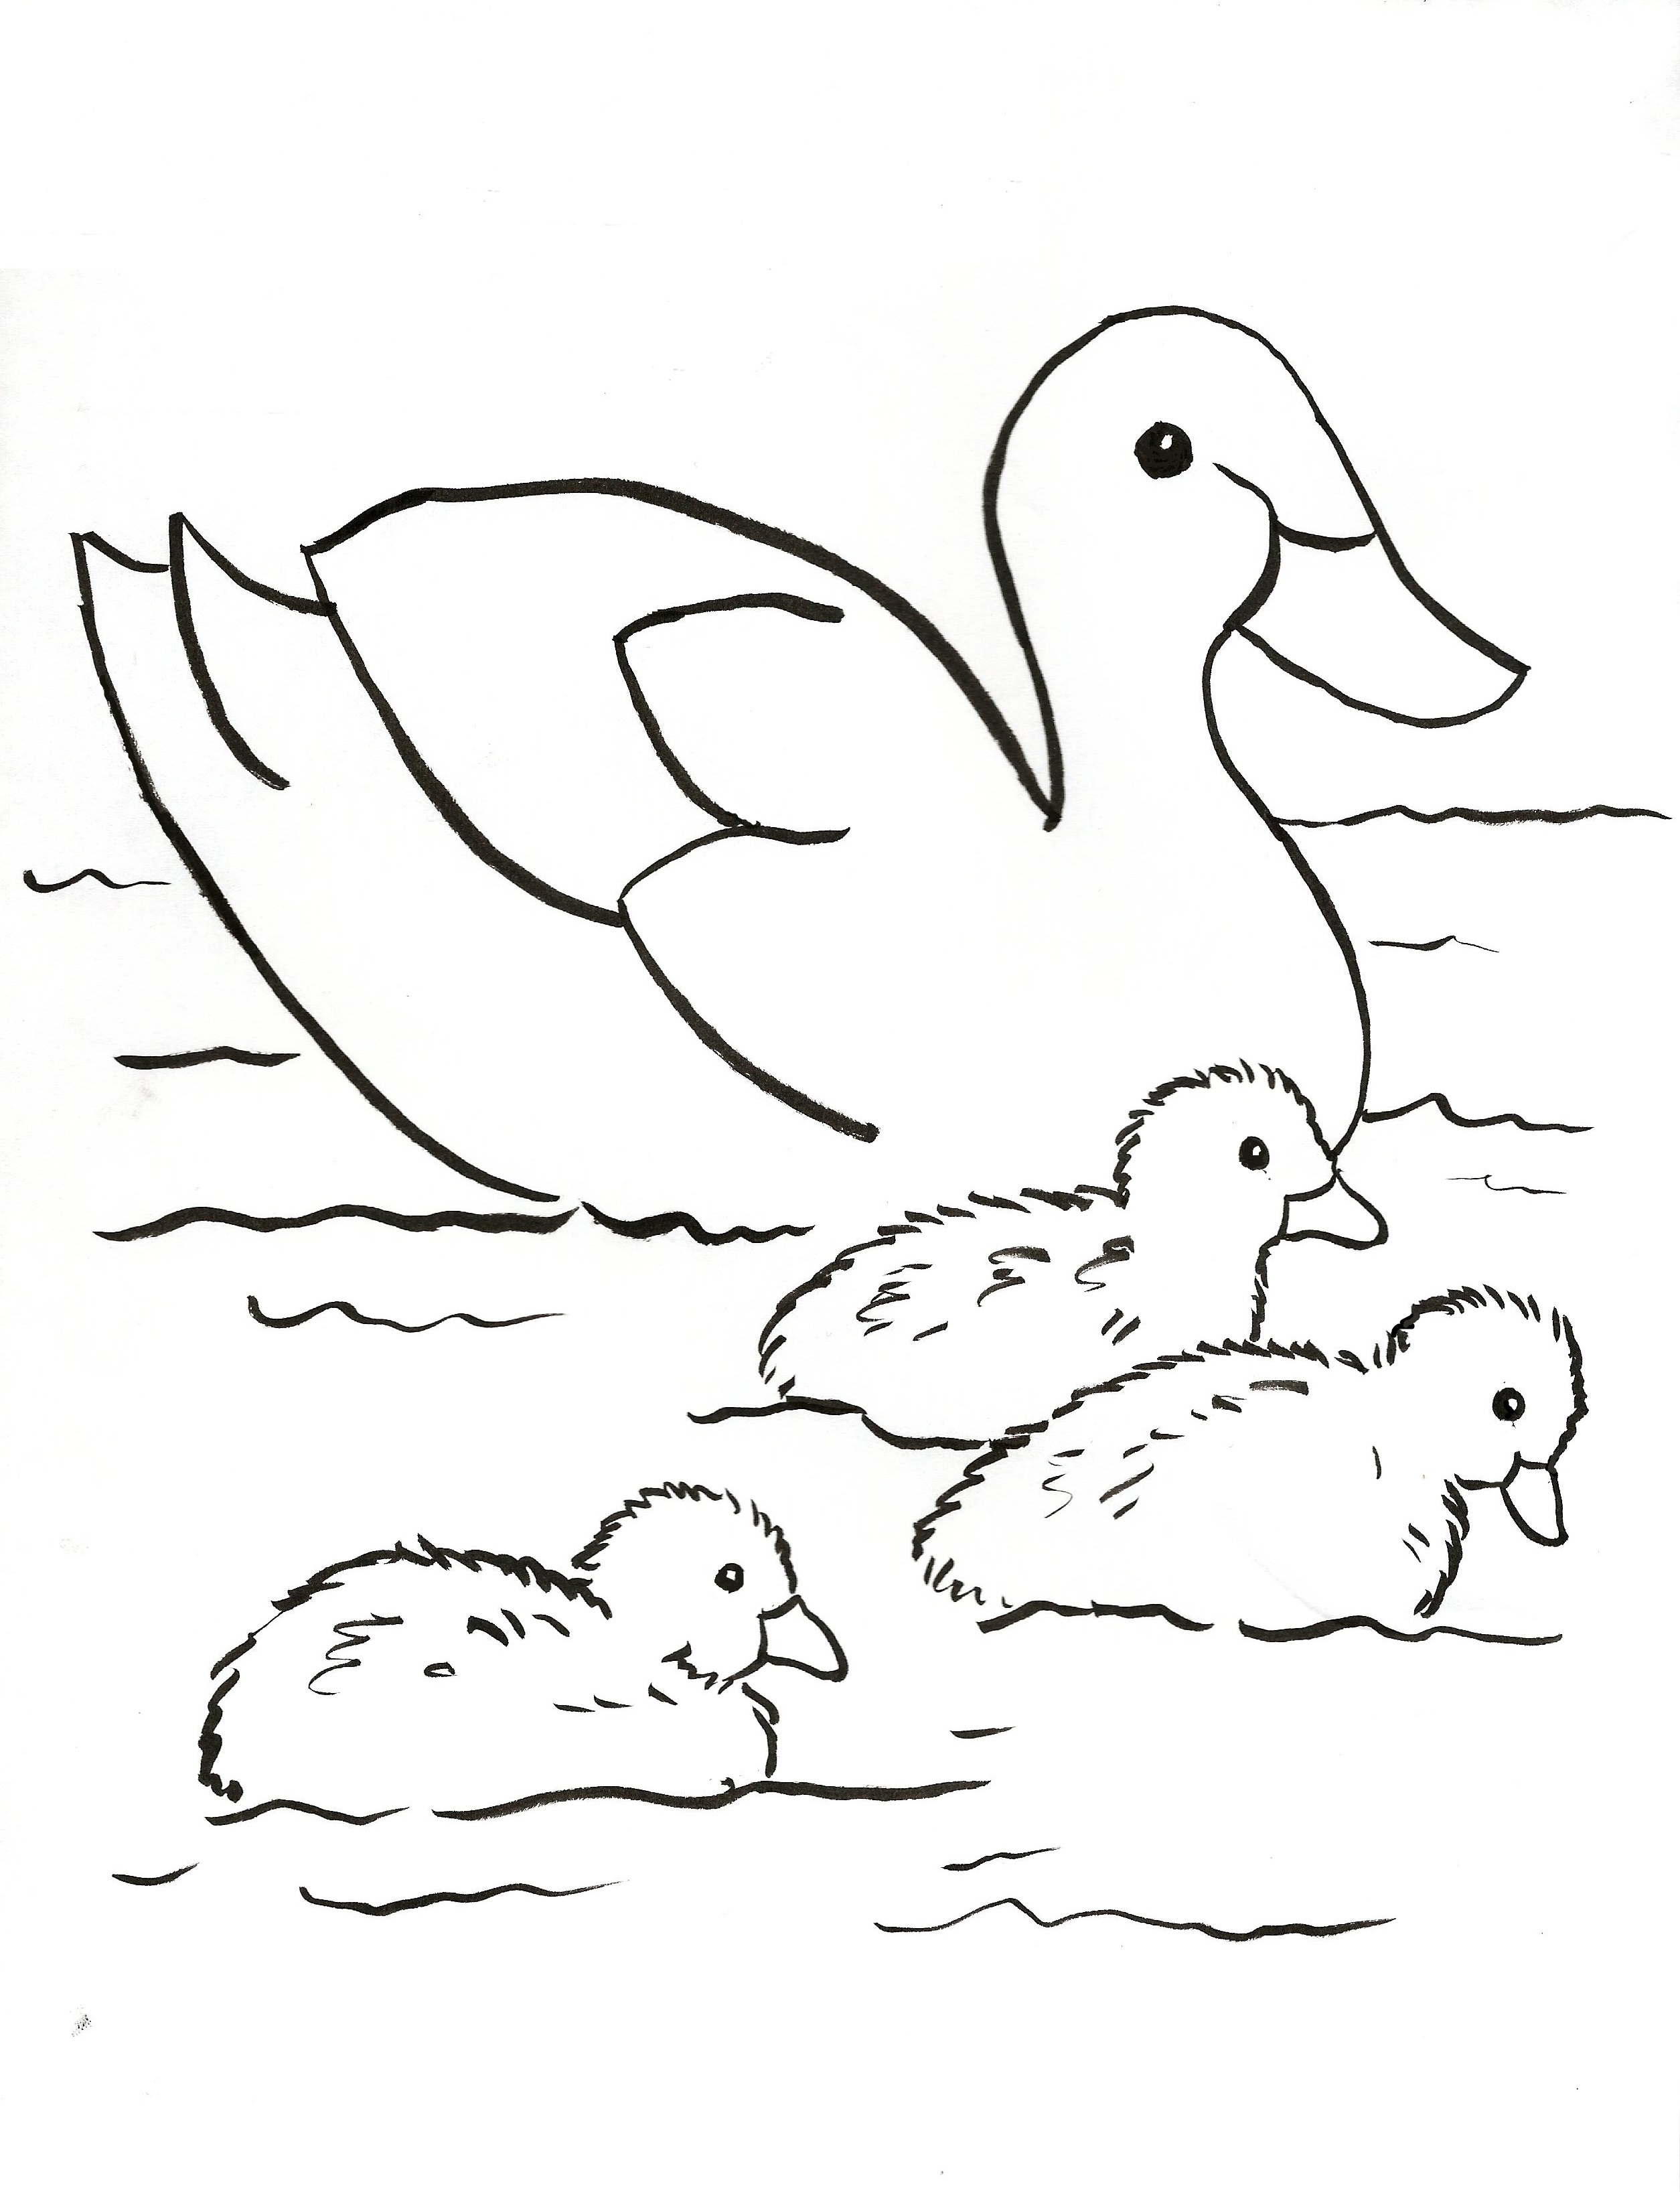 Pond Animals Coloring Pages at GetDrawings | Free download